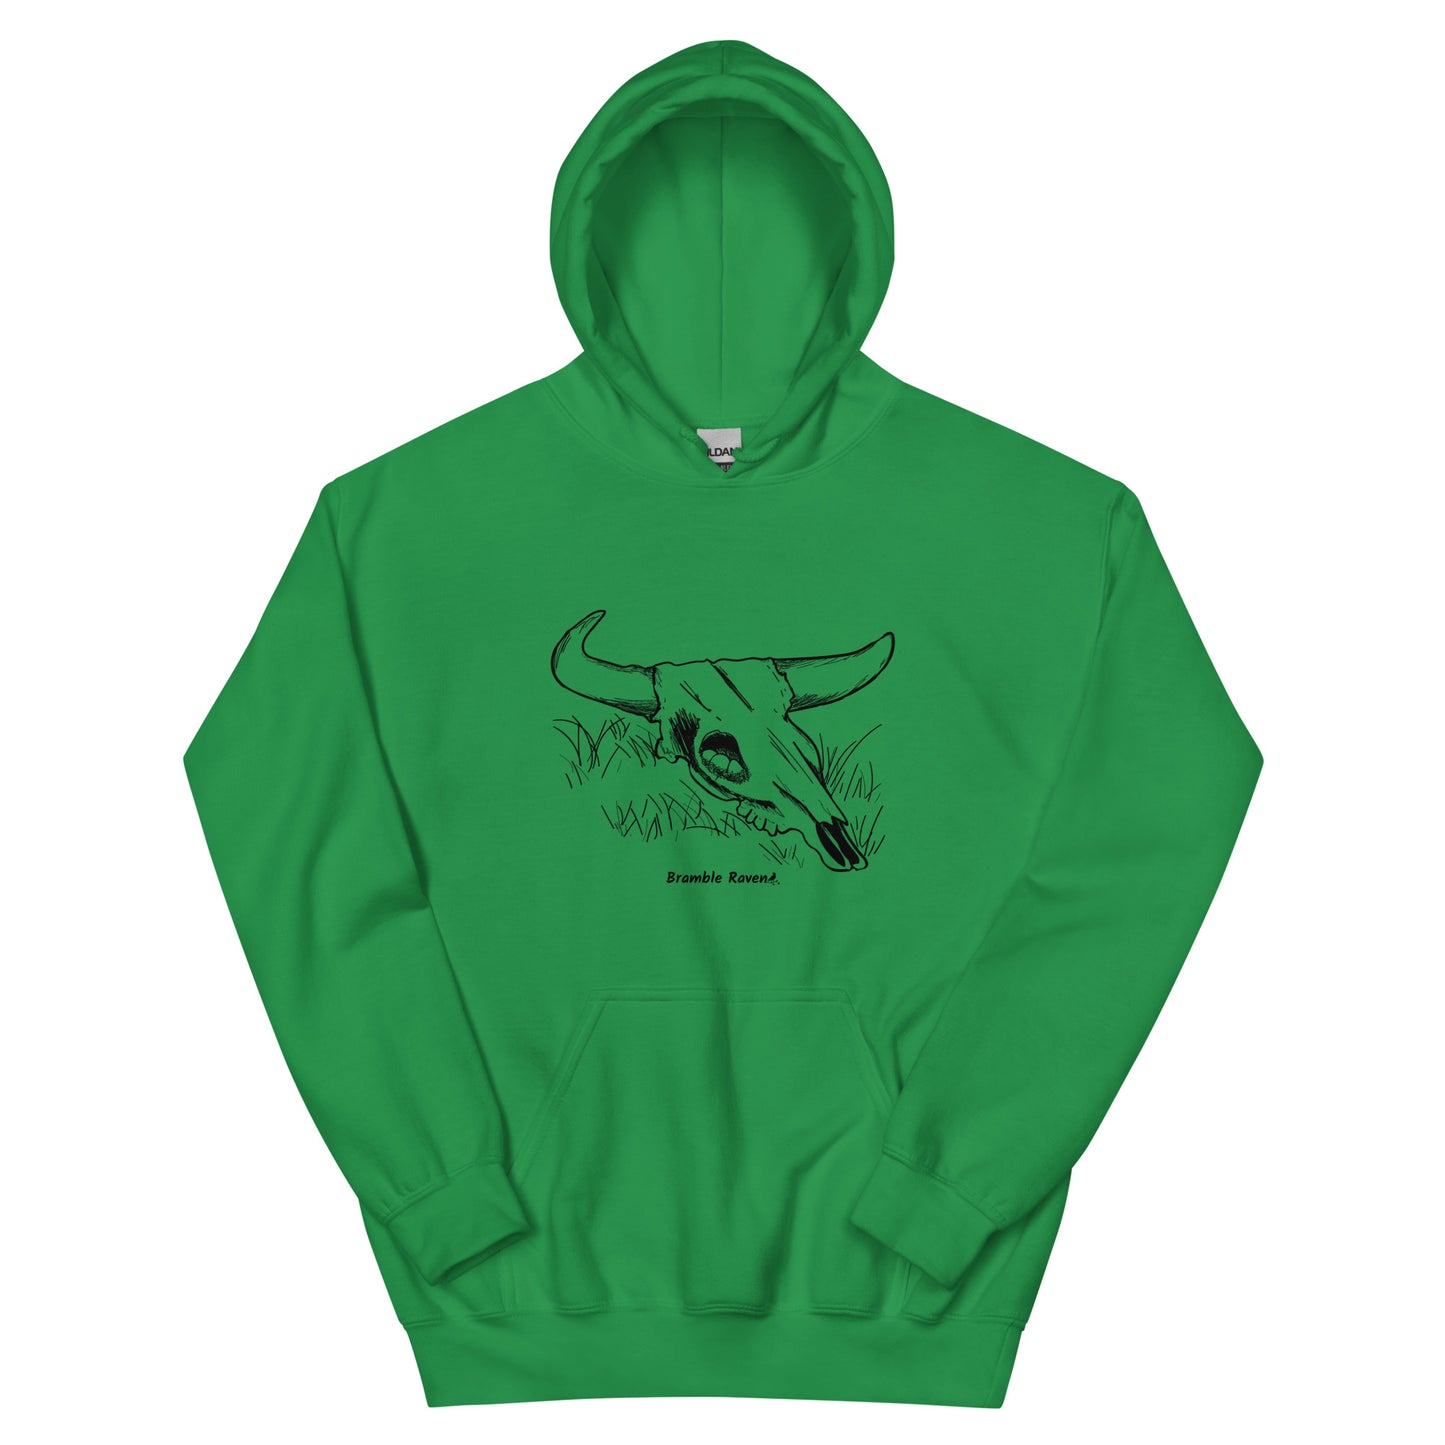 Irish green colored unisex hoodie. Front has image of a cow skull cradling a bird nest. Features double-lined hood and front pouch pocket.